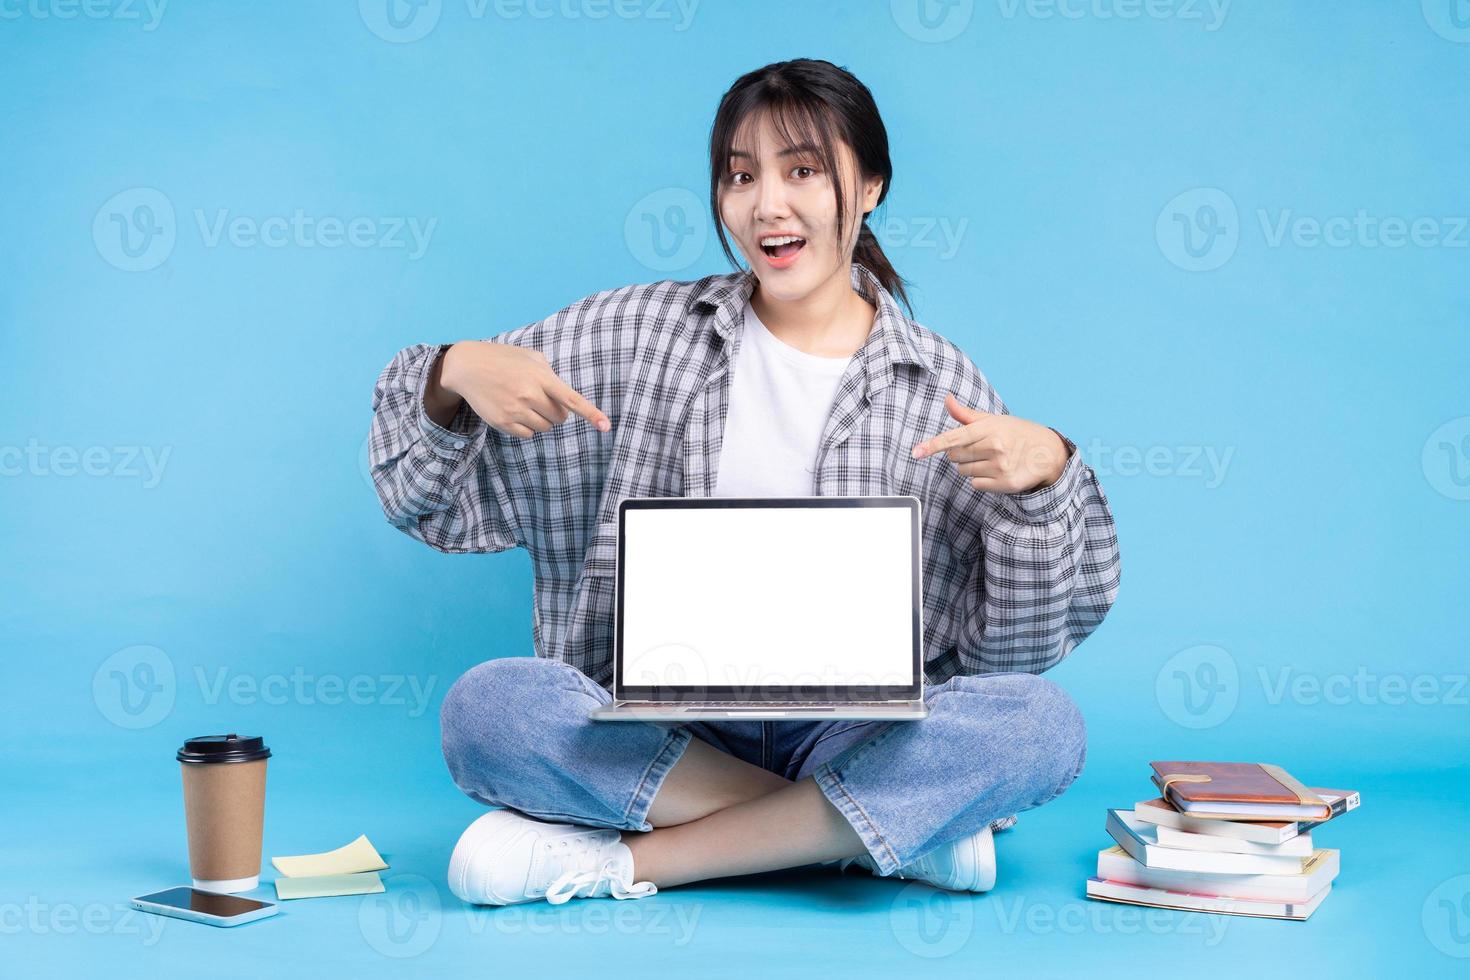 Asian female student with playful expression on blue background photo